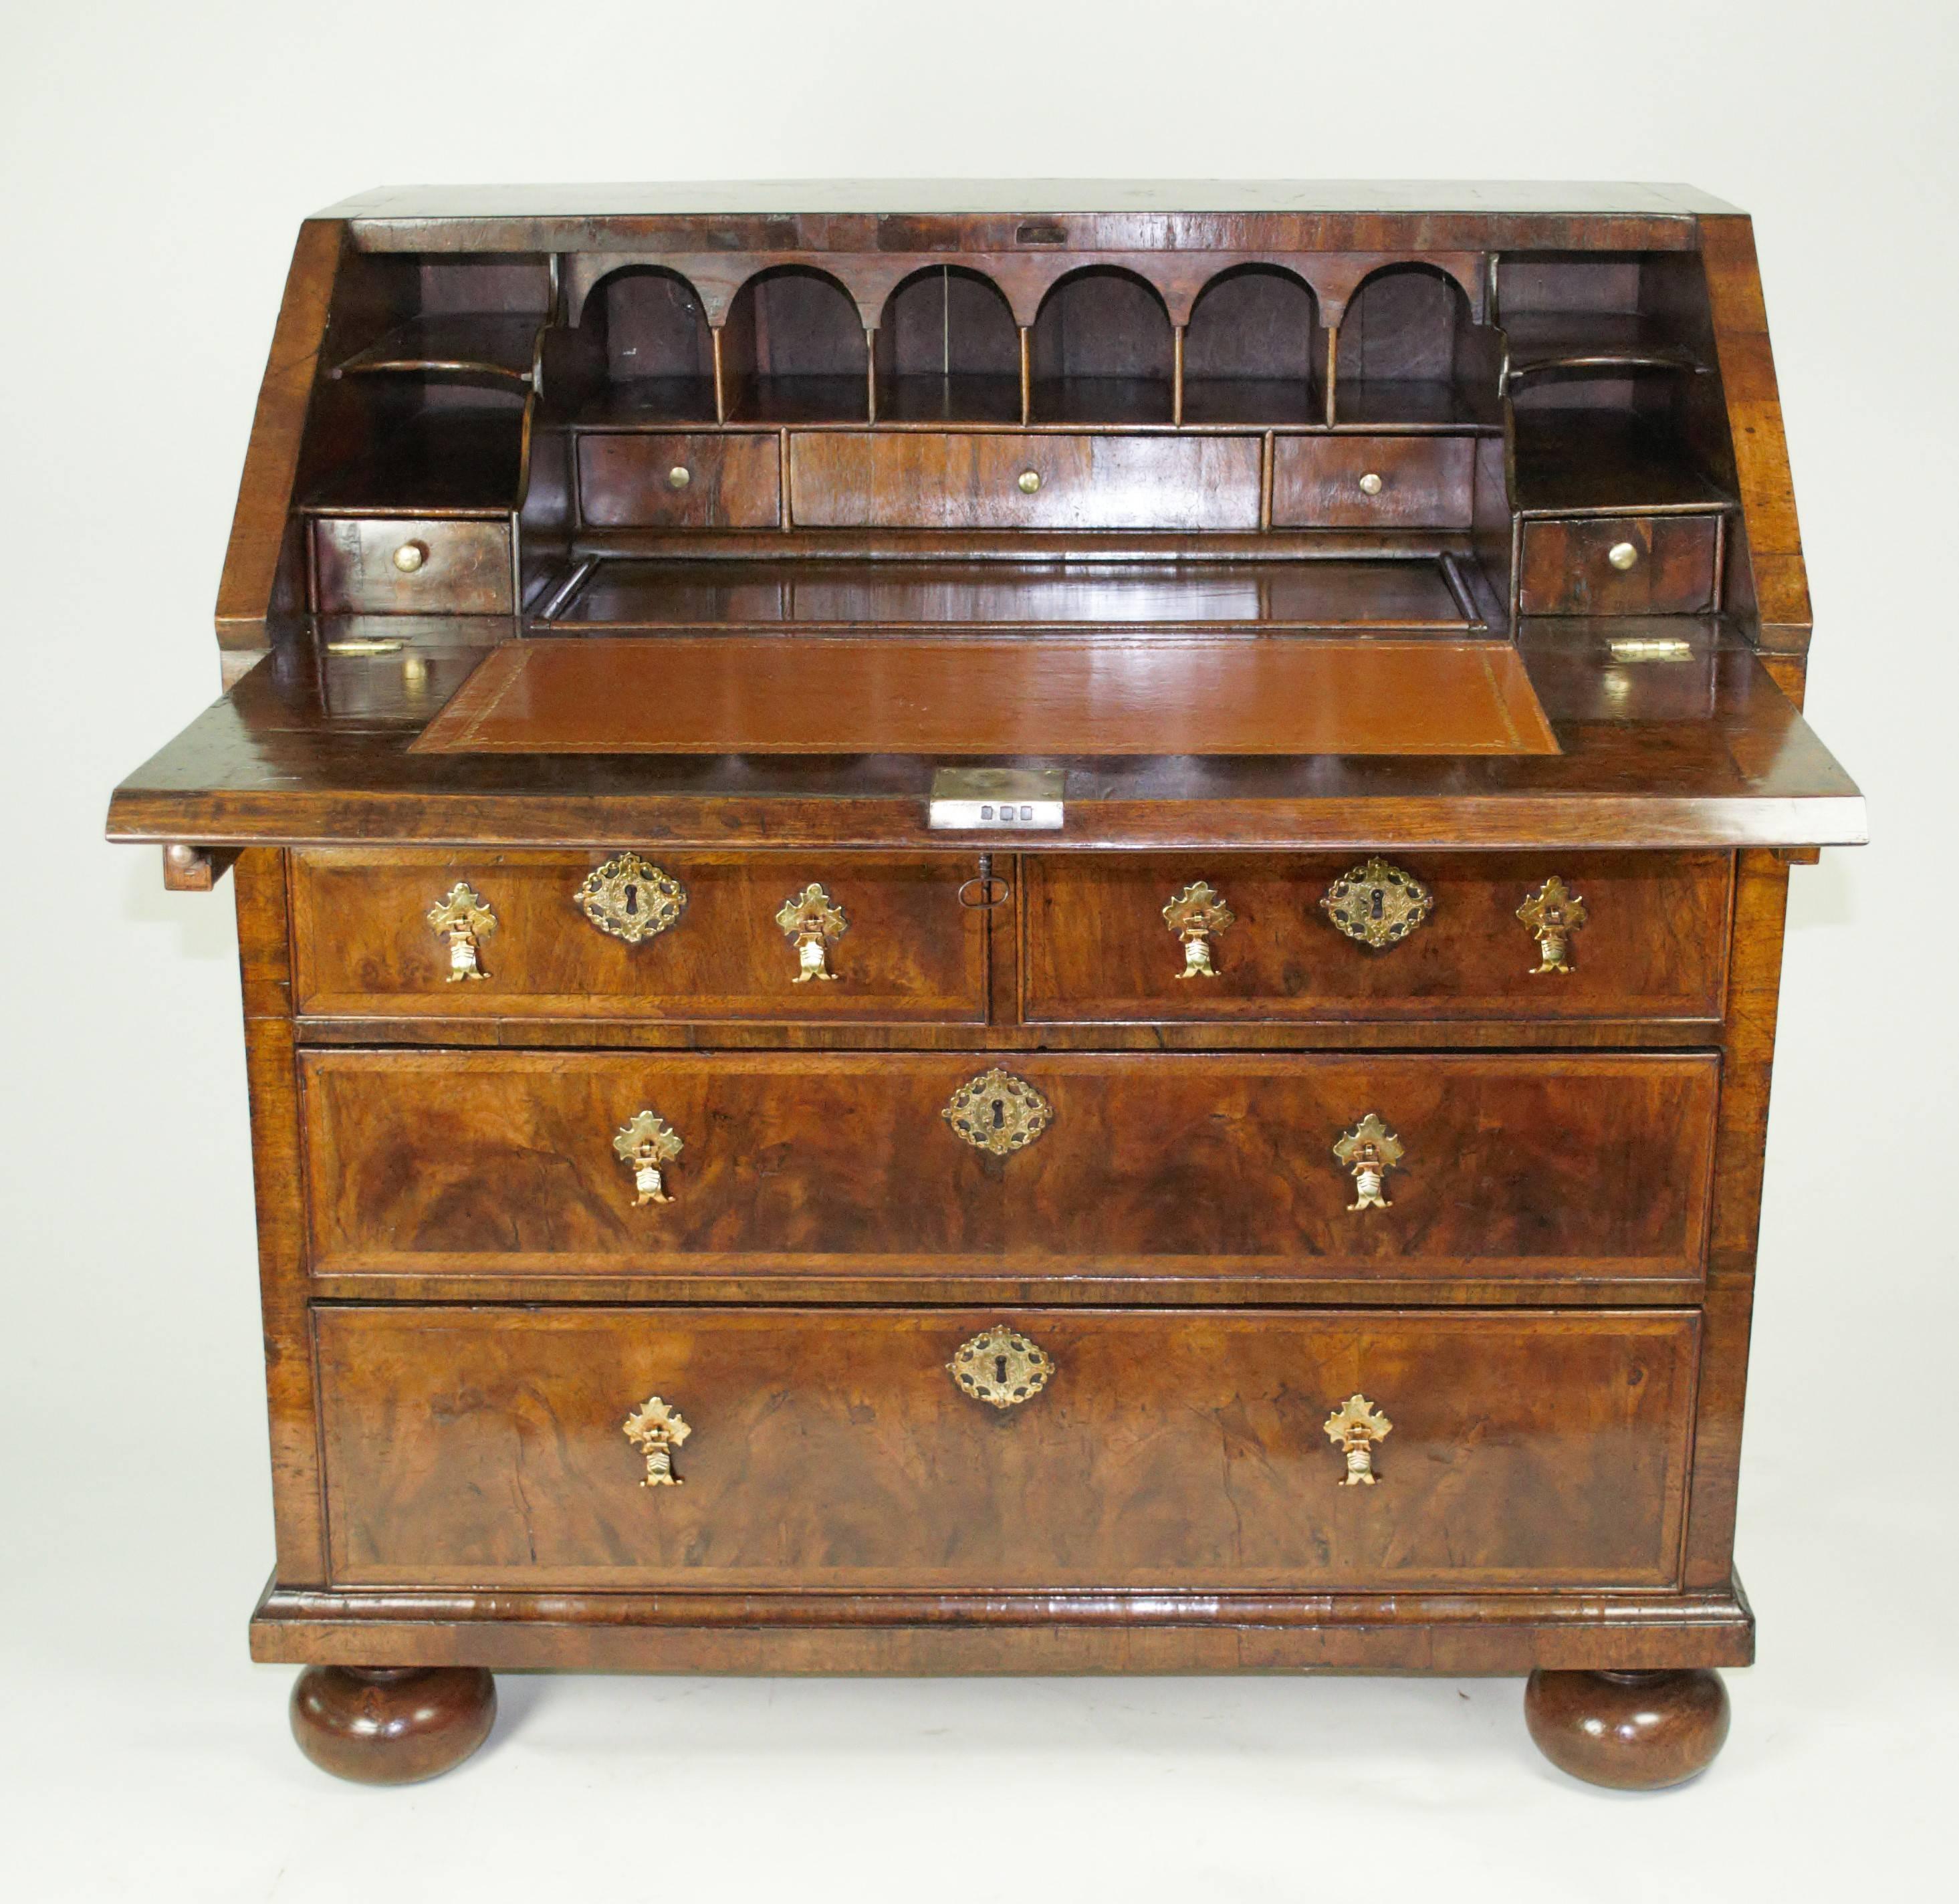 A good George I period walnut bureau. The fitted interior with a well, above two short and two long drawers, and standing on replaced bun feet. The whole cross-banded with herring-bone banding and of a good mellow color. Original brass